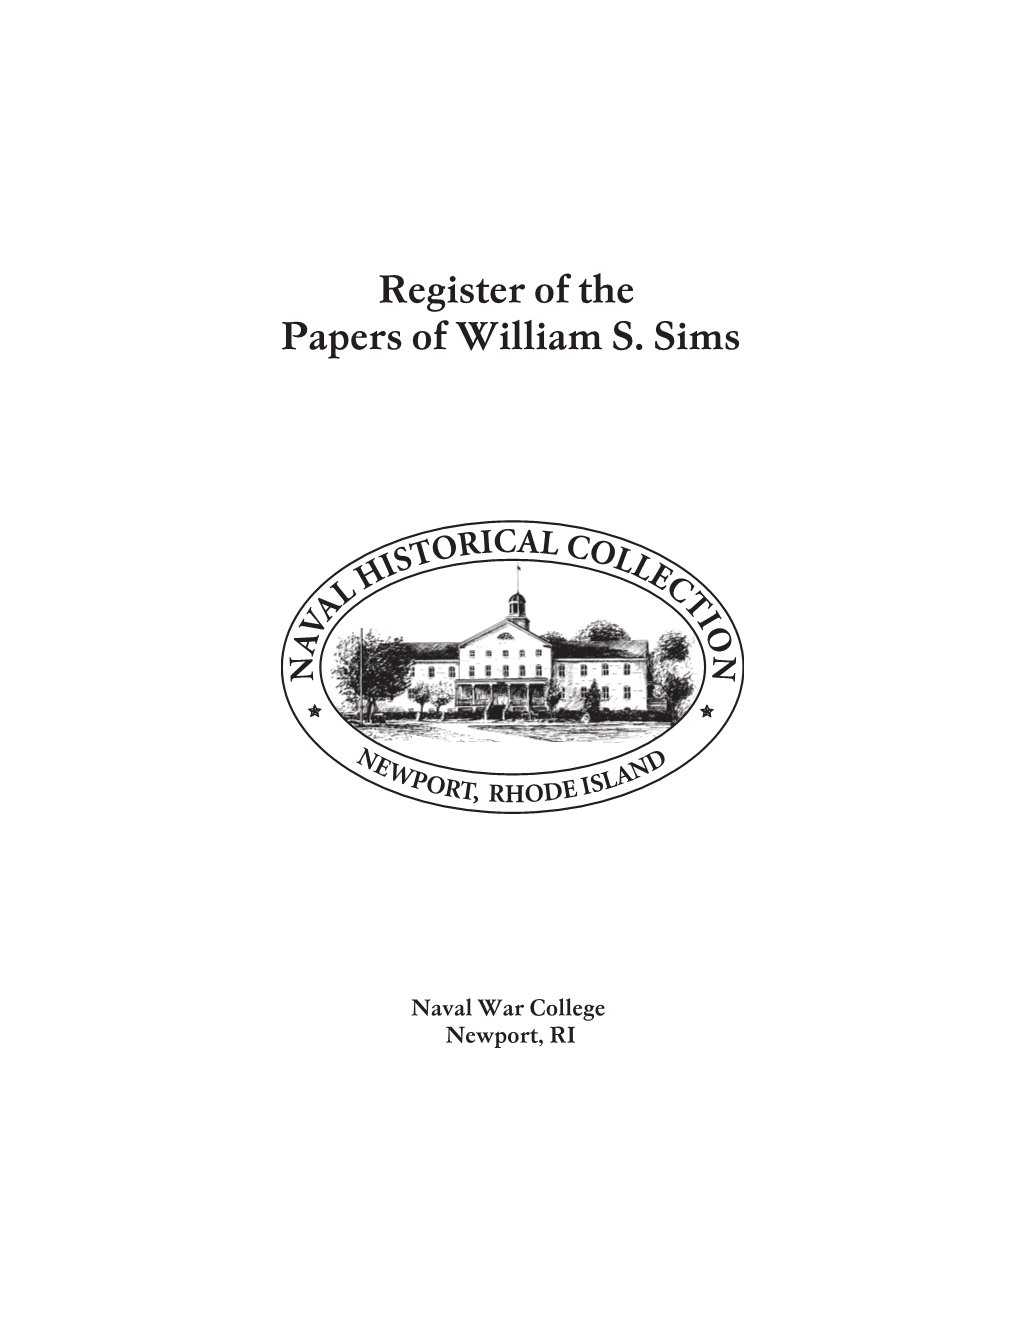 Register of the Papers of William S. Sims